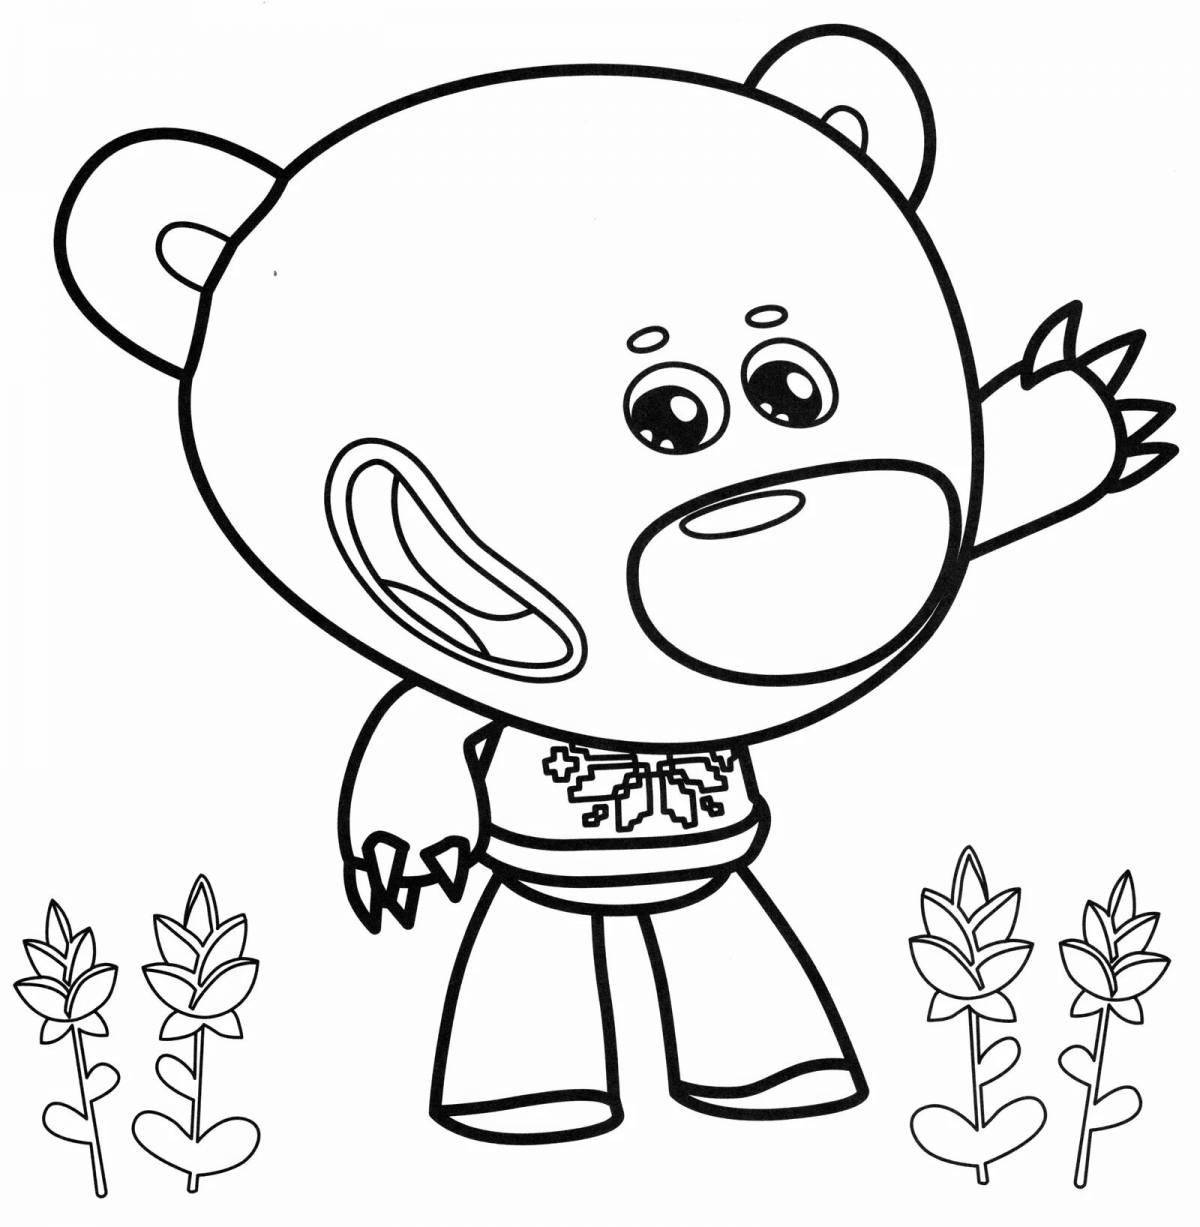 Color-frenzy mimmies compilation coloring page